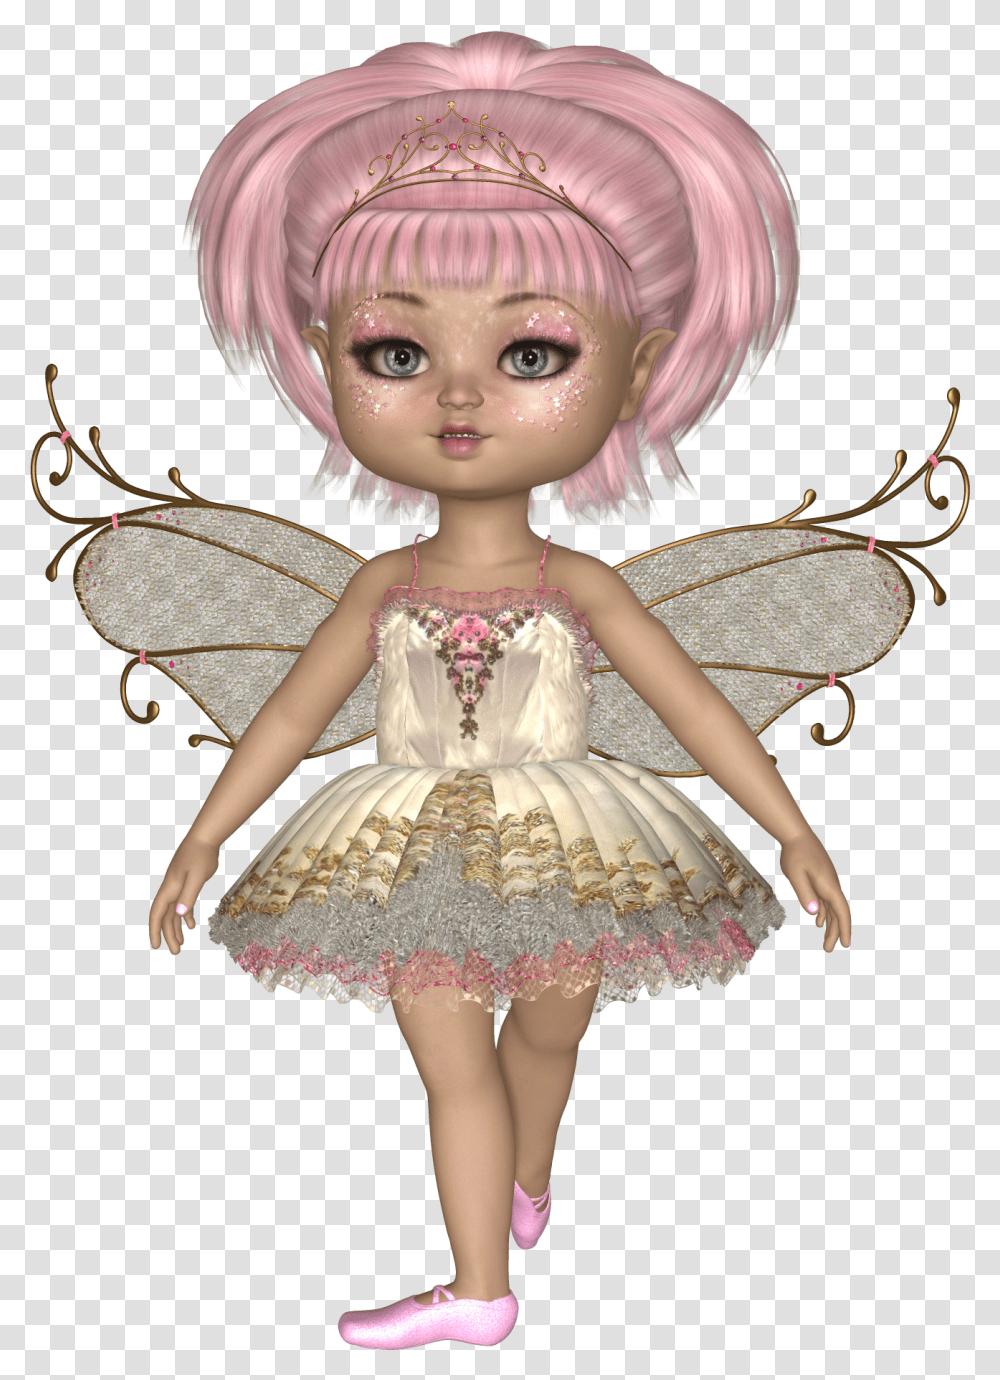 Fairy, Doll, Toy, Skirt Transparent Png